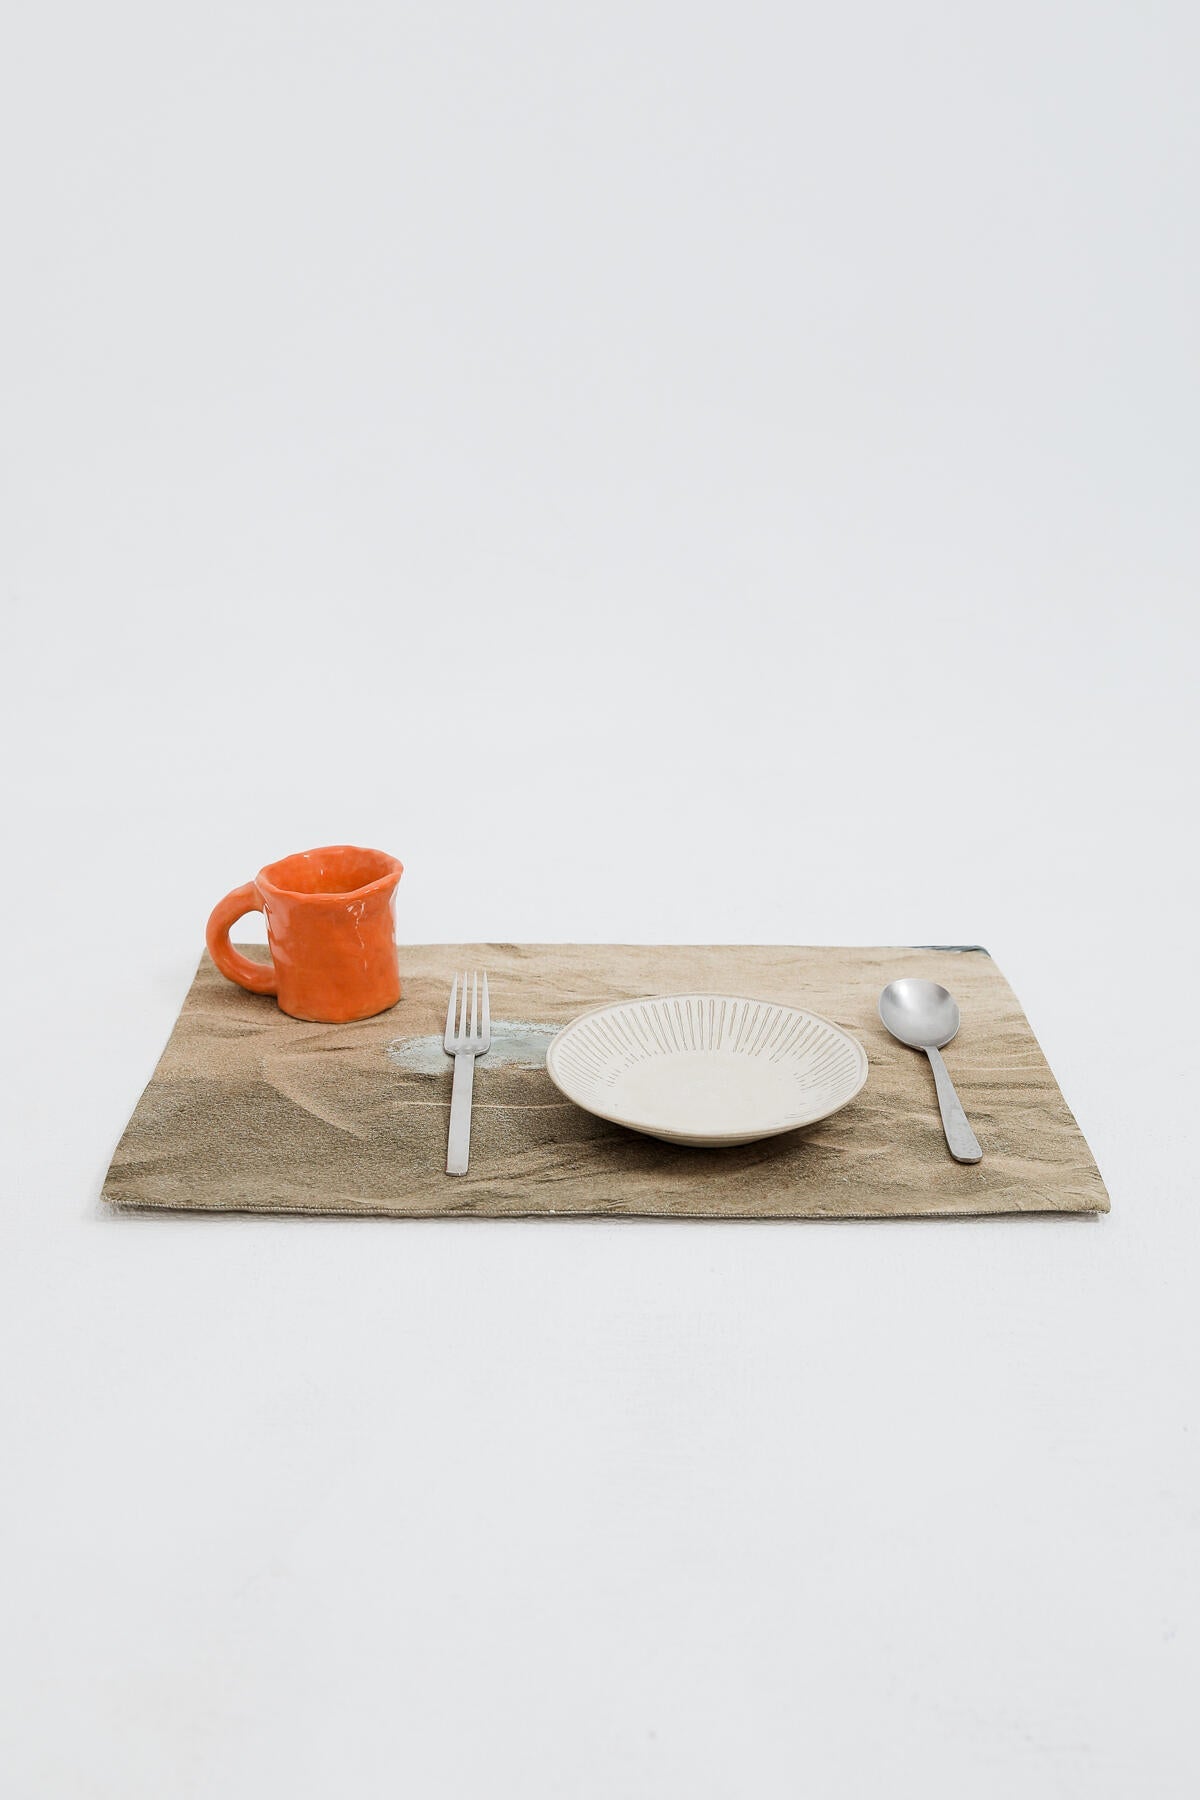 B213_Sand Hold Placemat_L_01